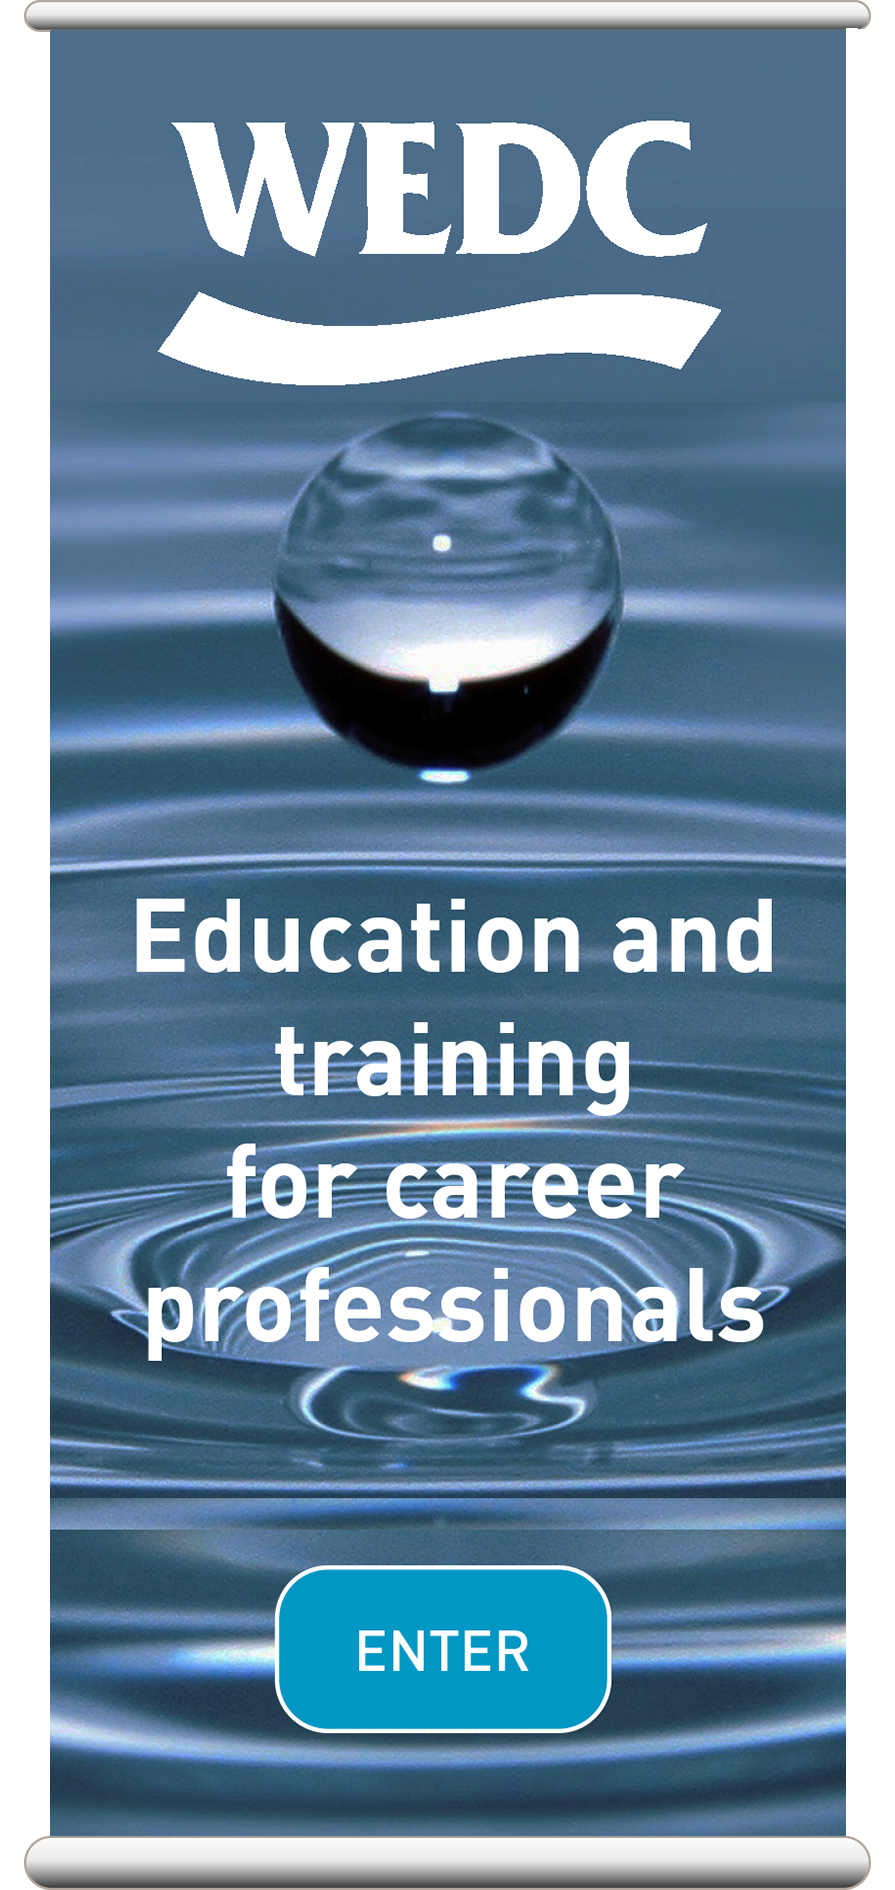 Click image to find out more about WEDC Education and Training